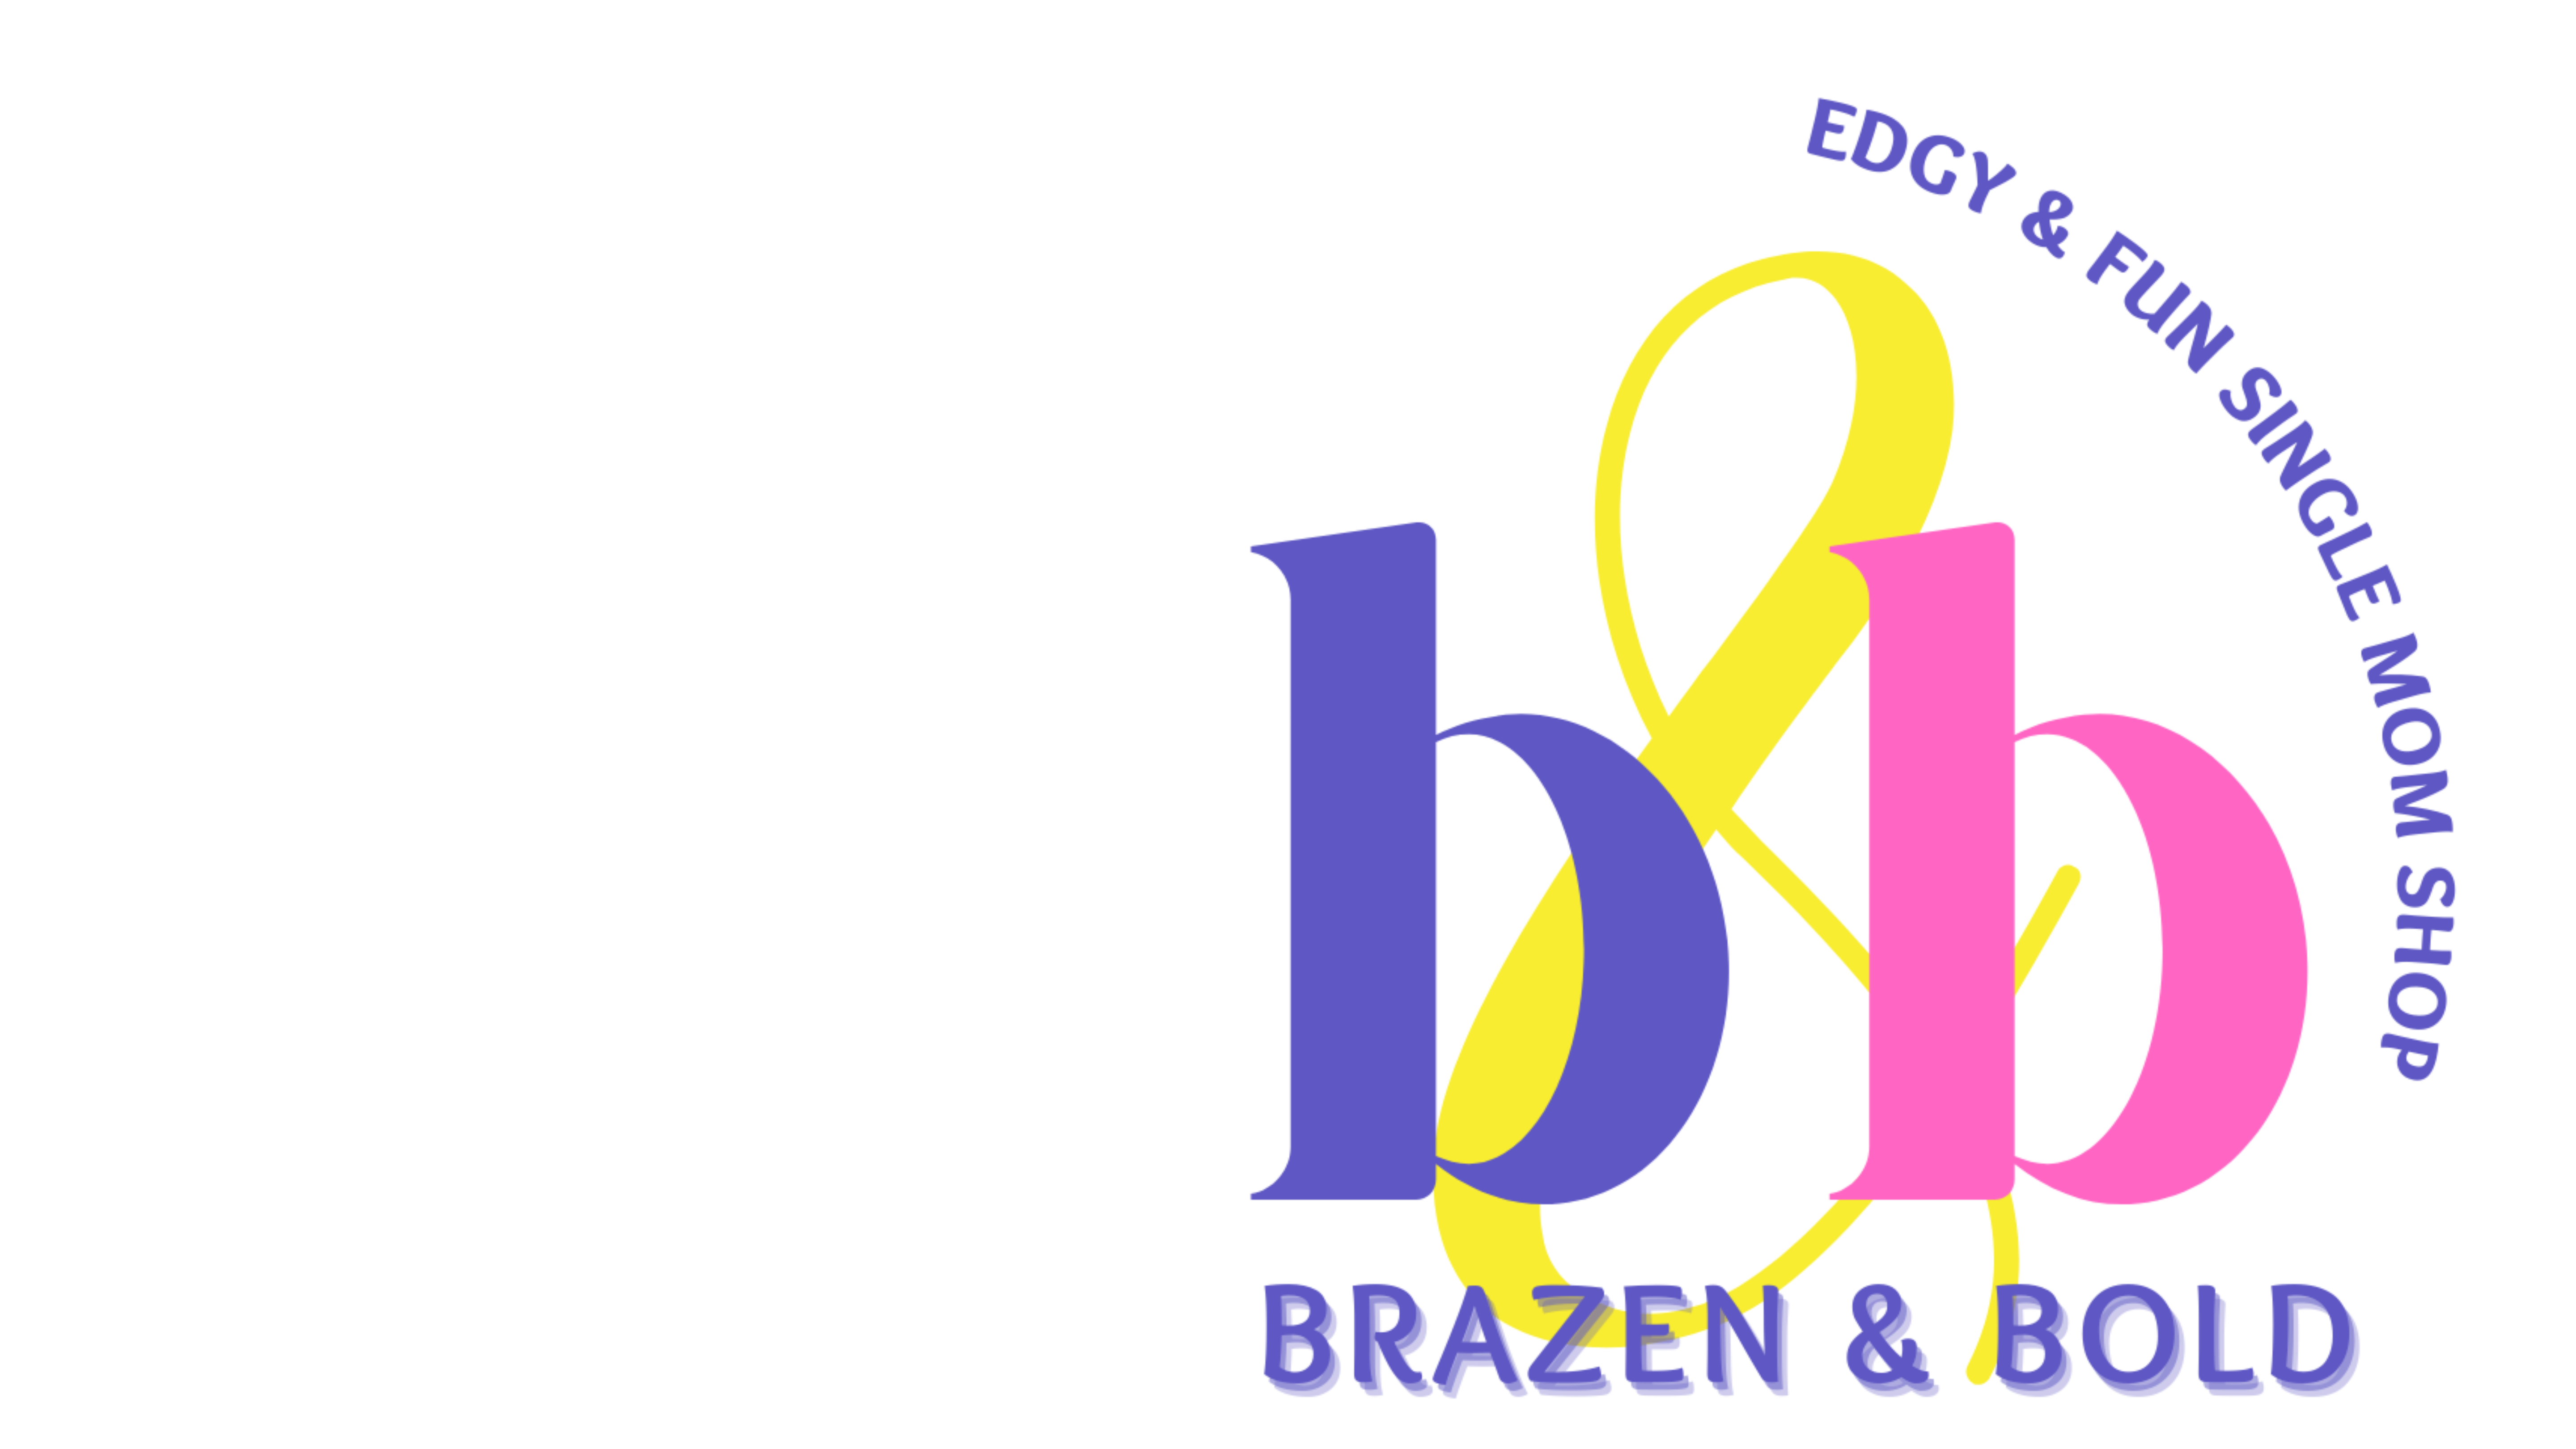 Brazen and Bold is an online shop celebrating single moms with fun, inspirational wearables, honoring the work they do! #singlemom